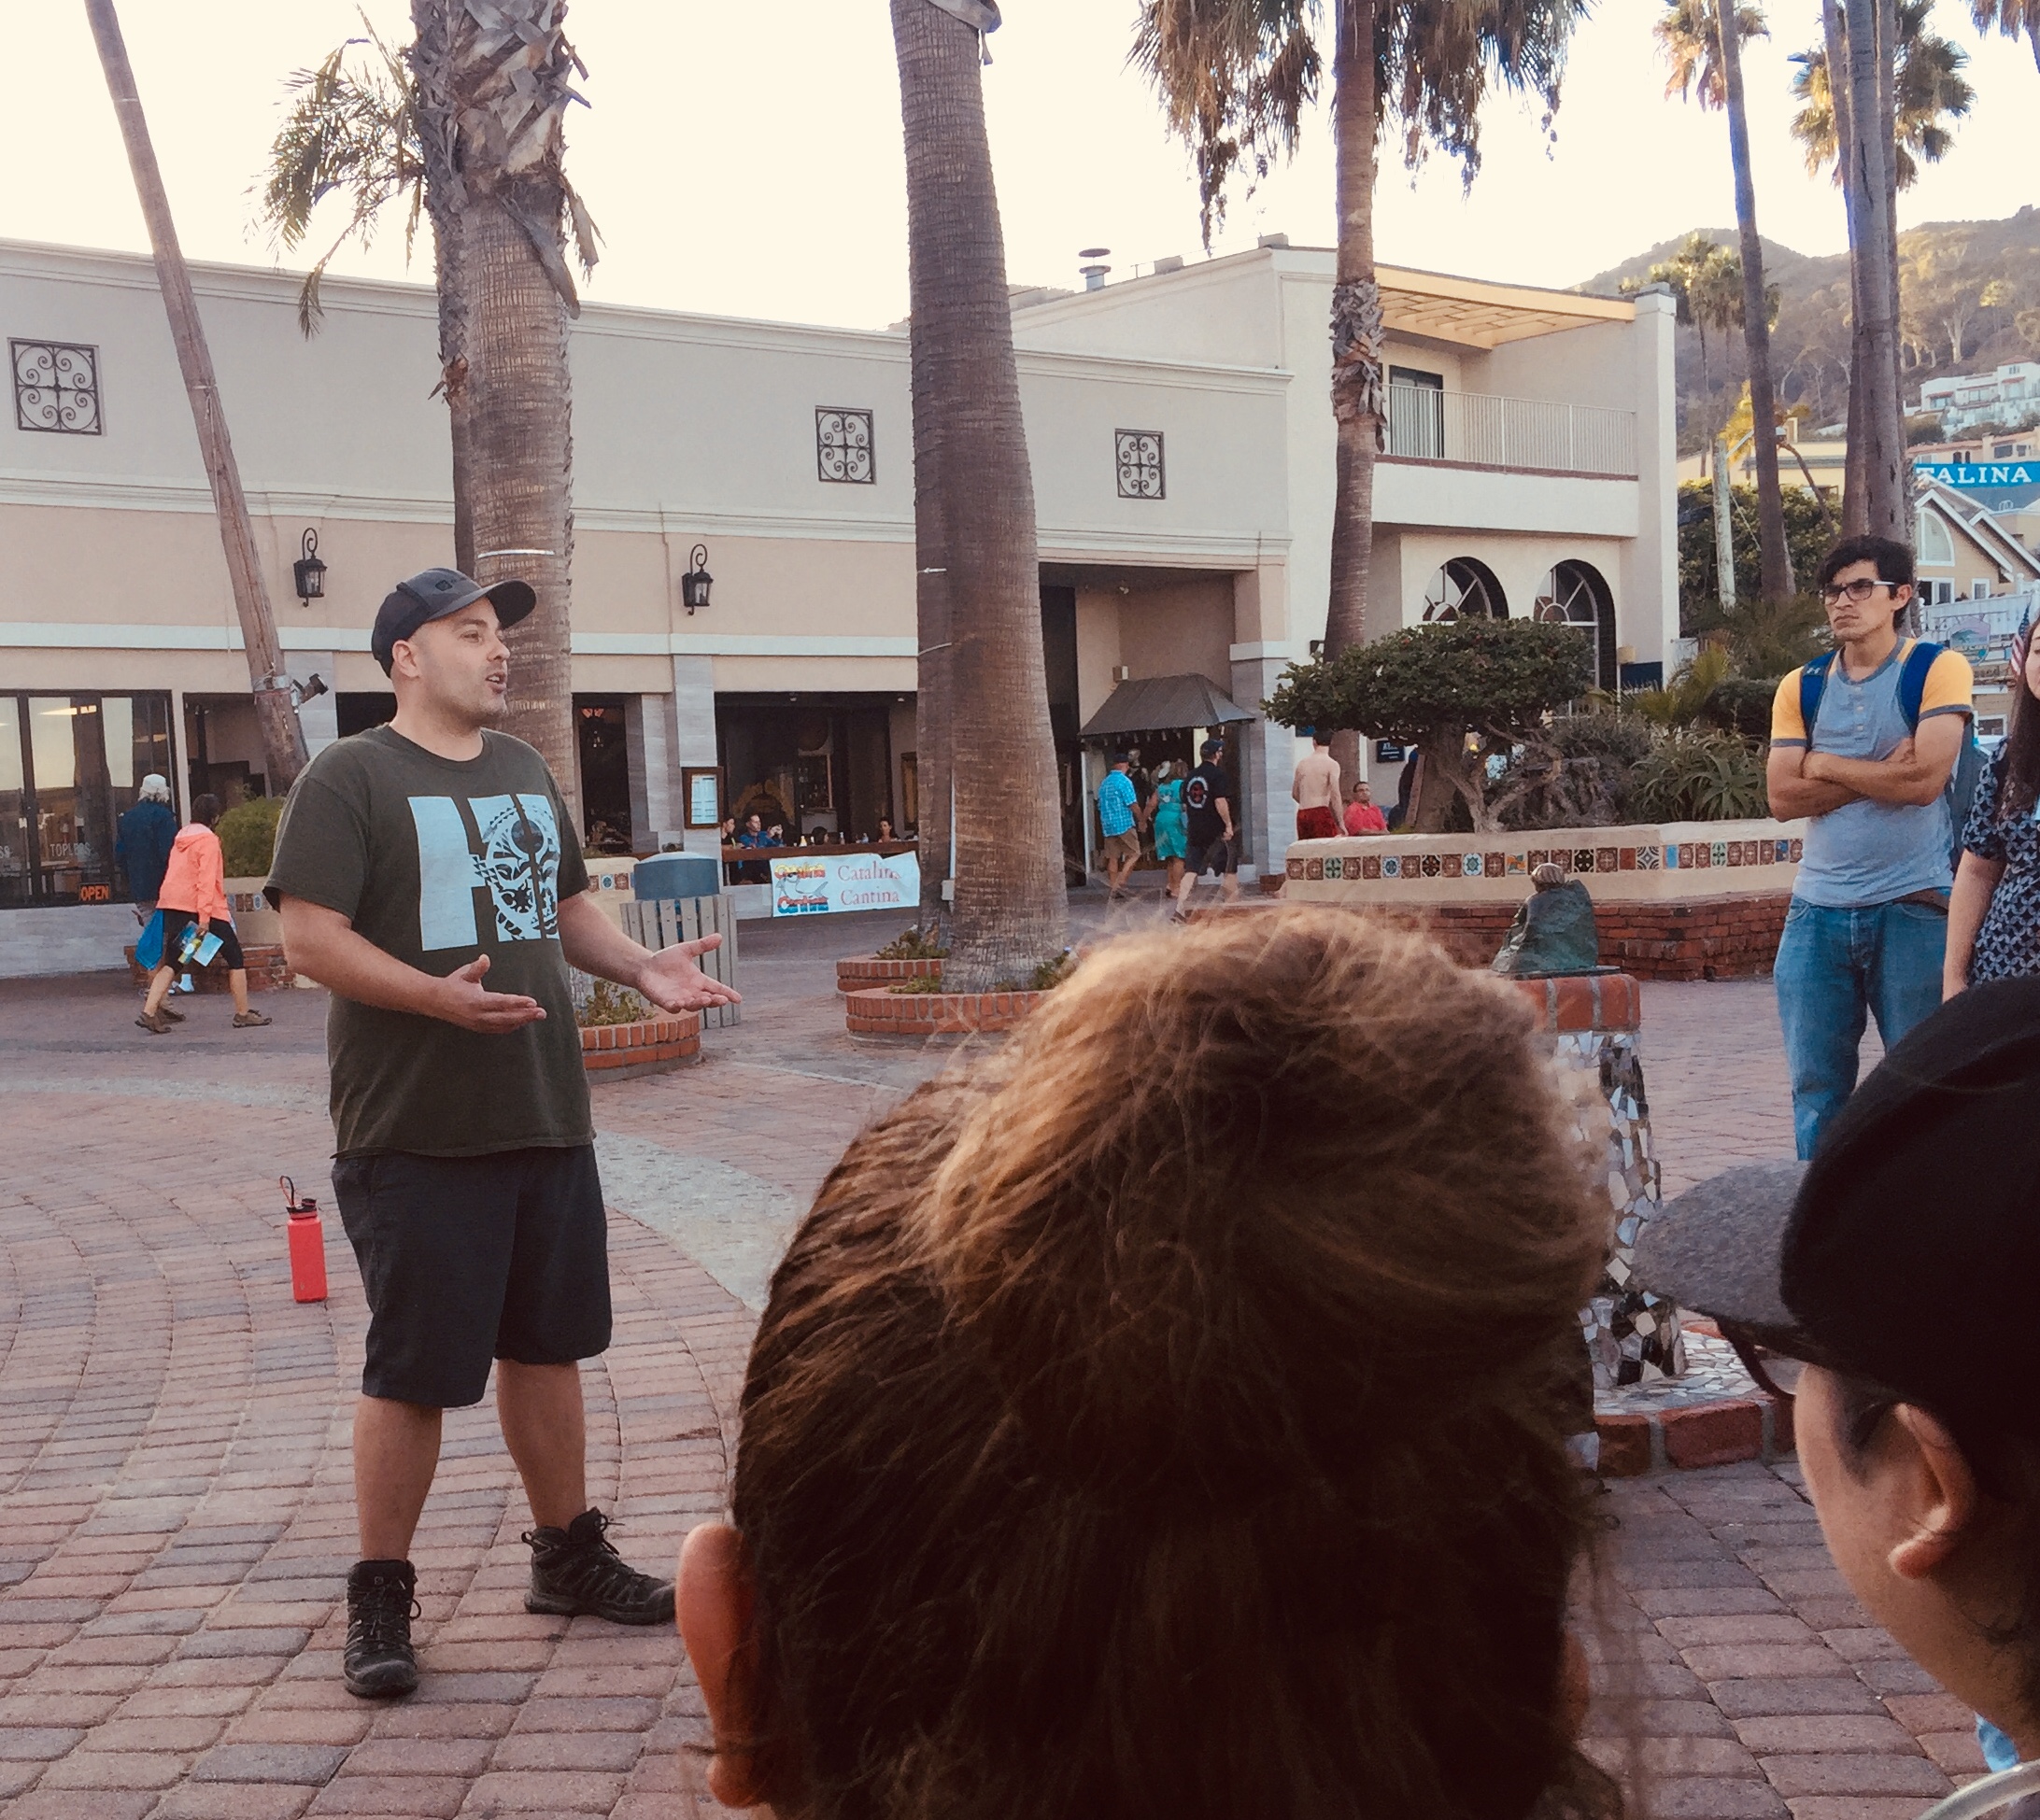 A student delivers a speech to other students at the Avalon public boardwalk.